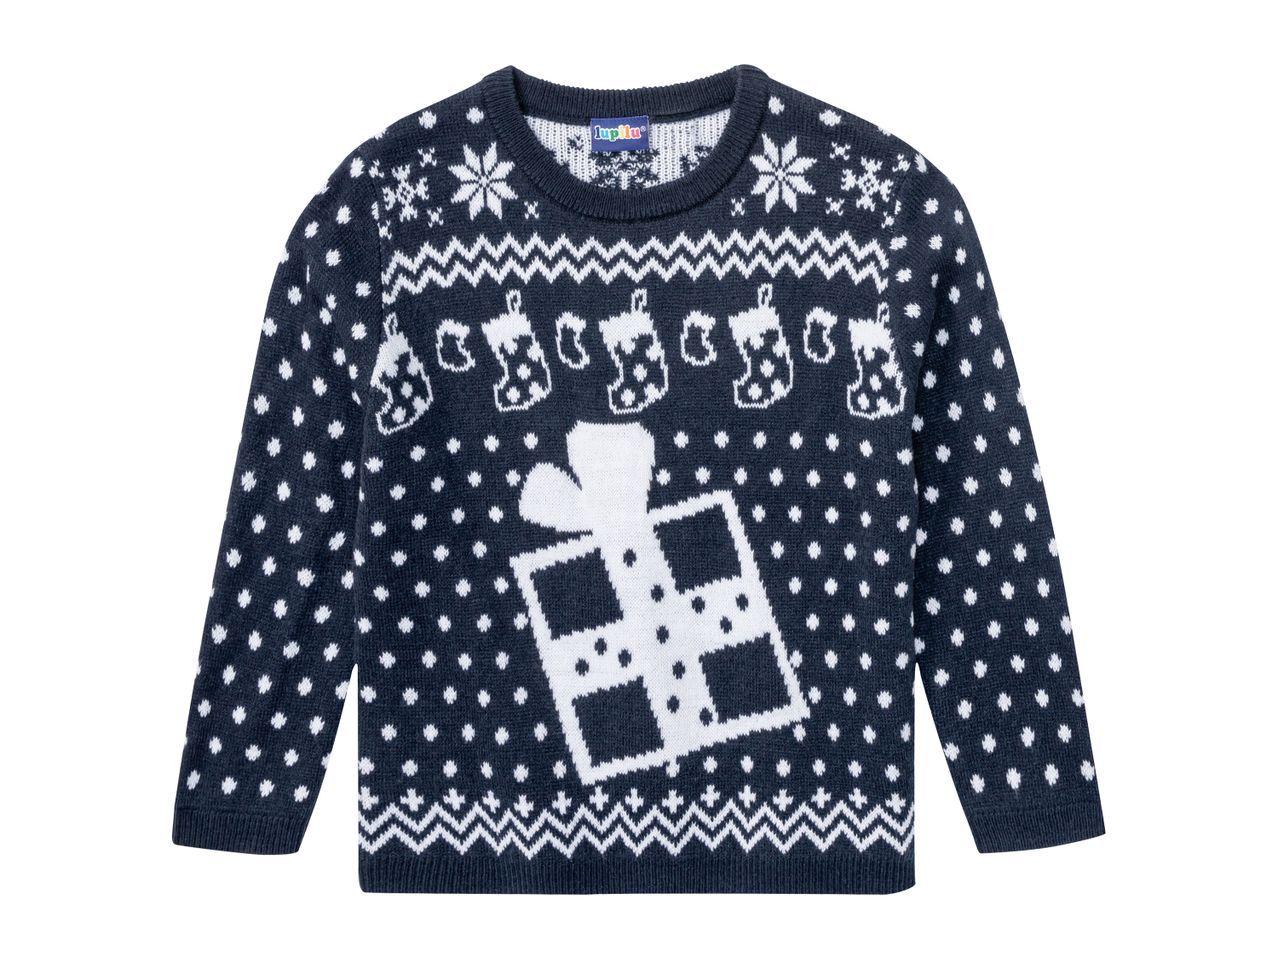 Go to full screen view: Lupilu Younger Kids’ Light-Up Christmas Jumper - Image 2